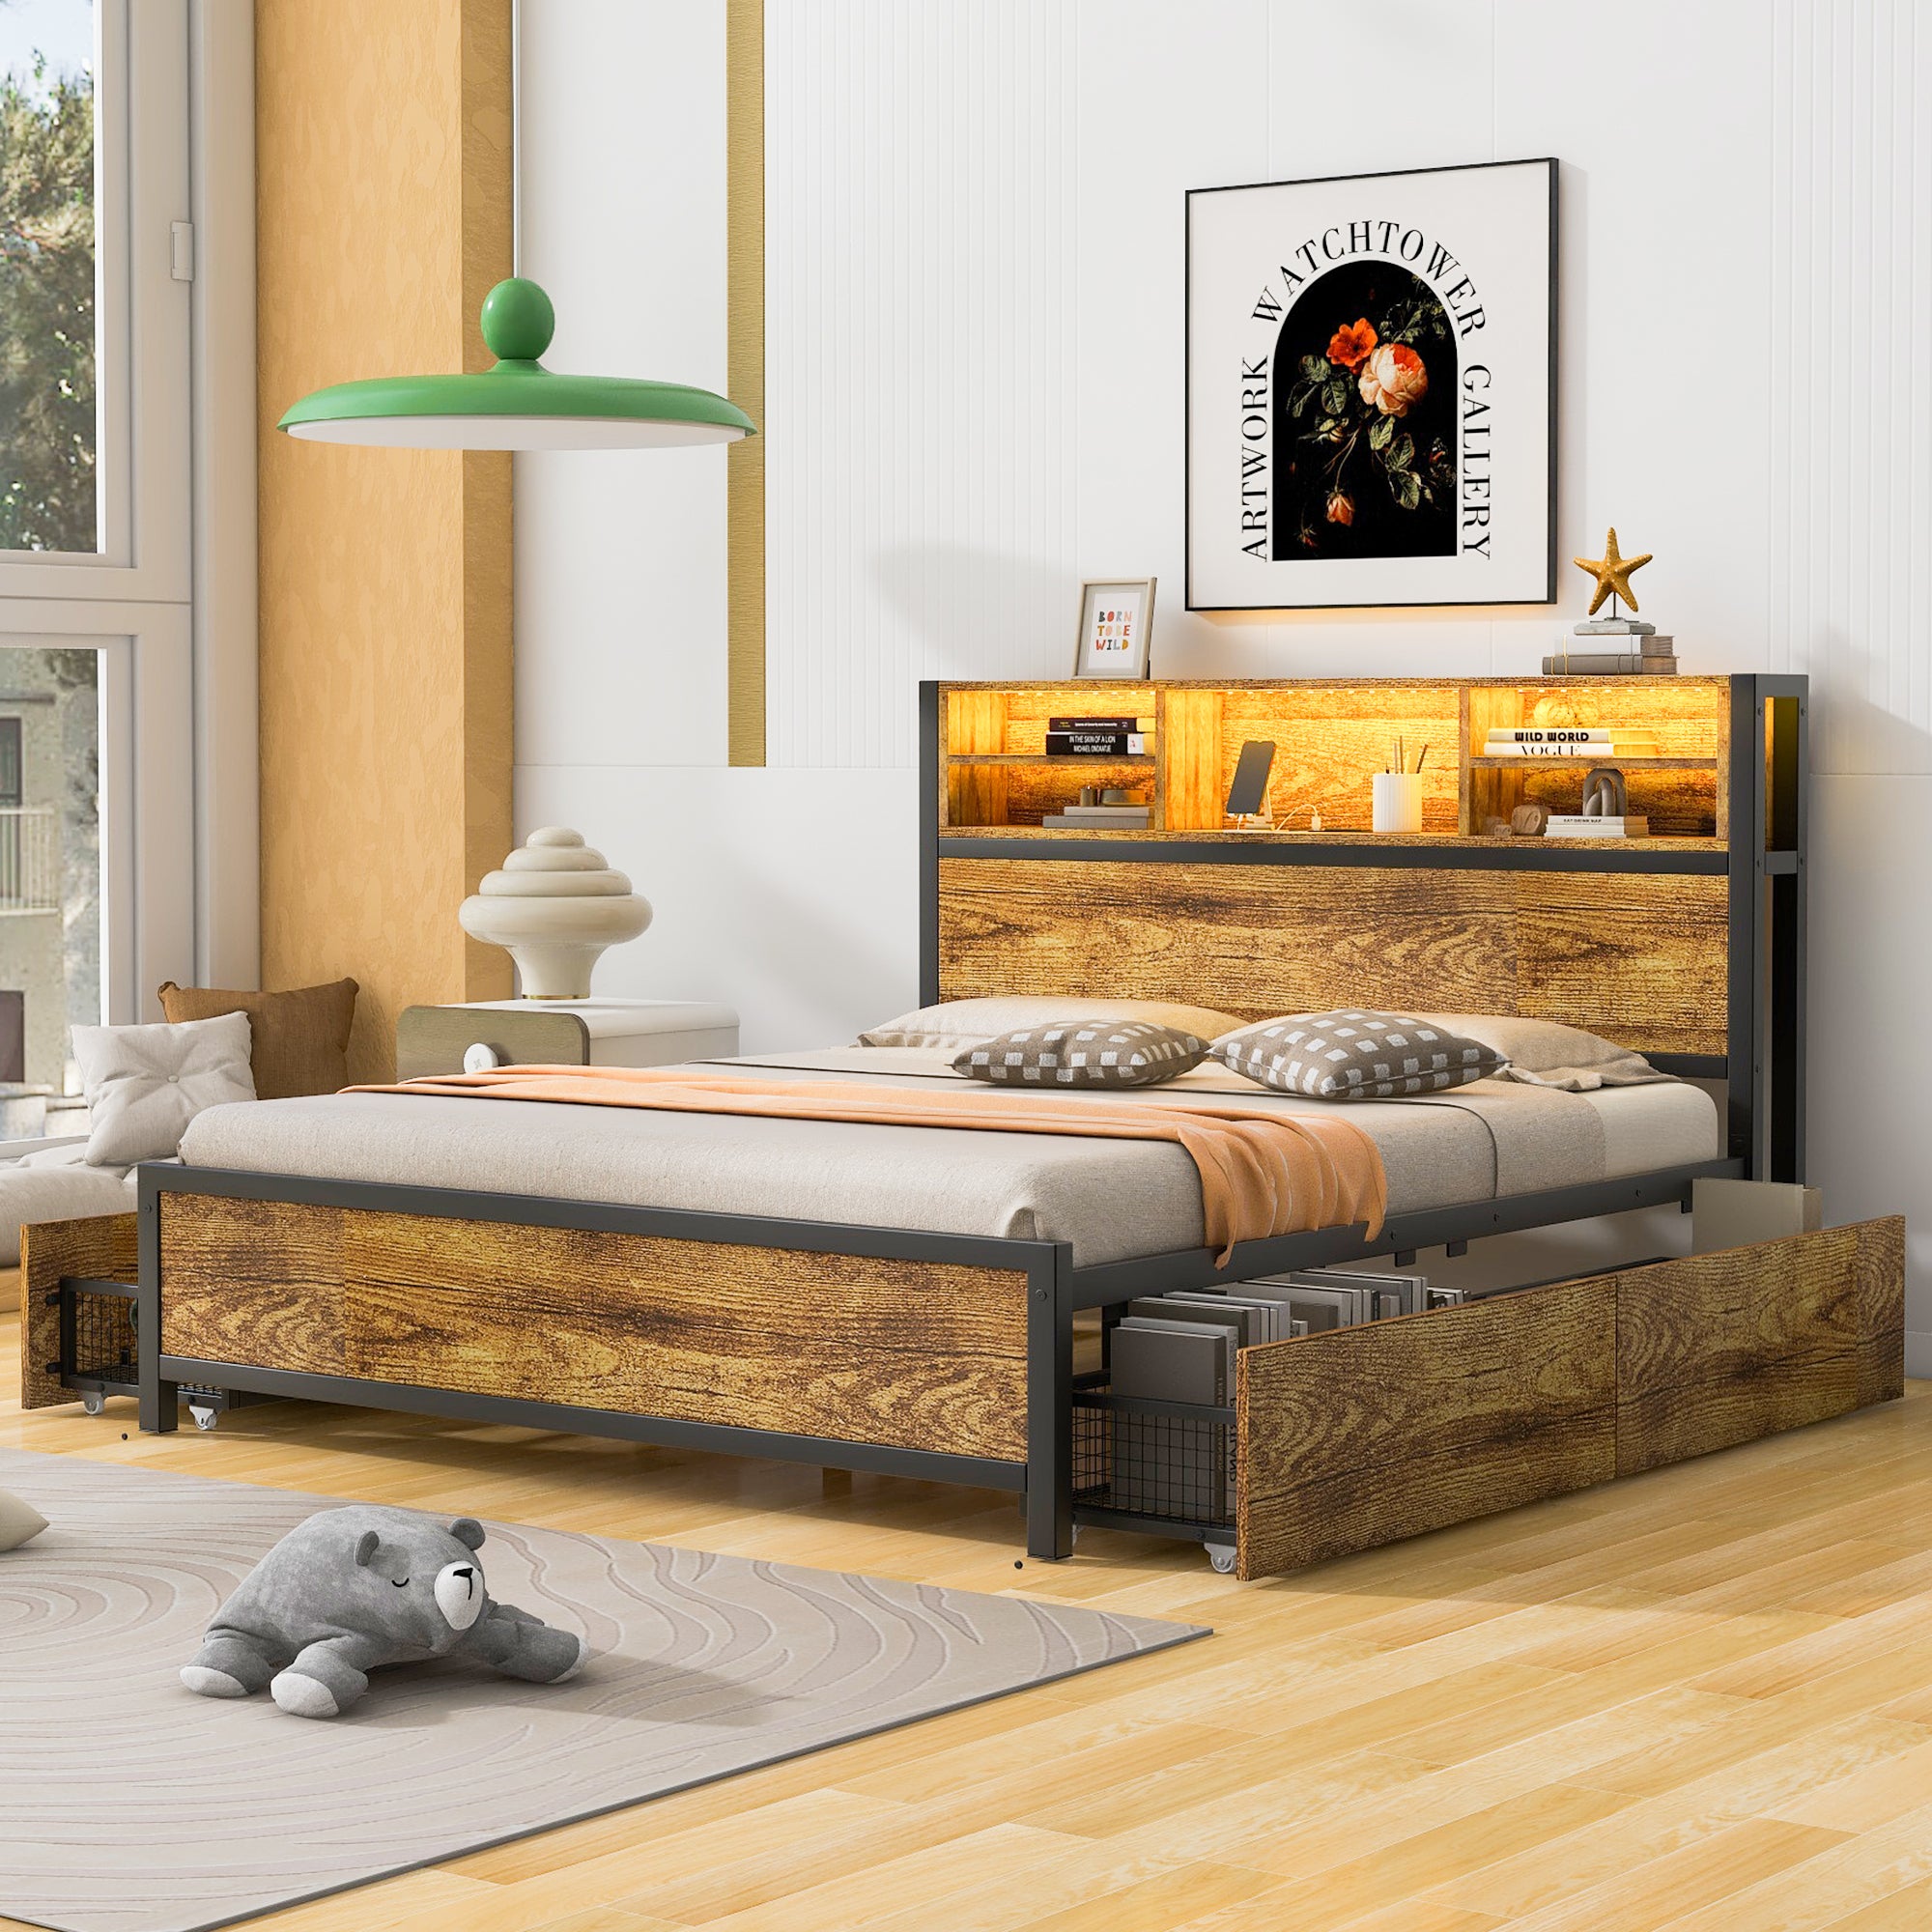 Bellemave Metal Platform Bed With 4 drawers, Sockets and USB Ports